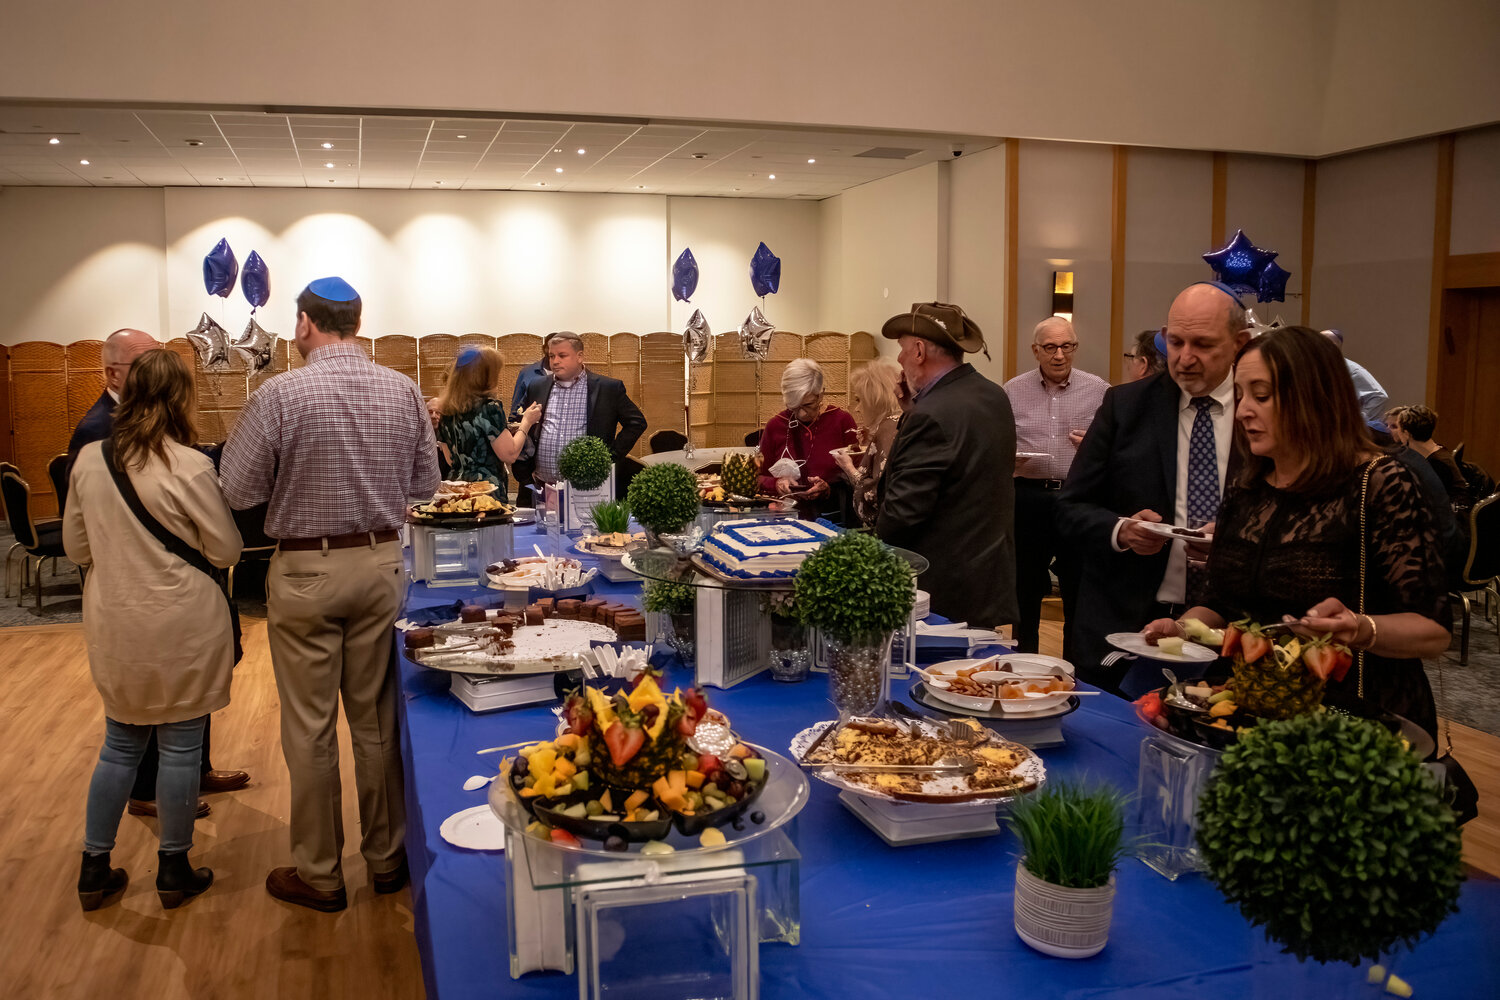 A casual desert reception followed the ceremony in the Merrick Jewish Centre’s social hall.